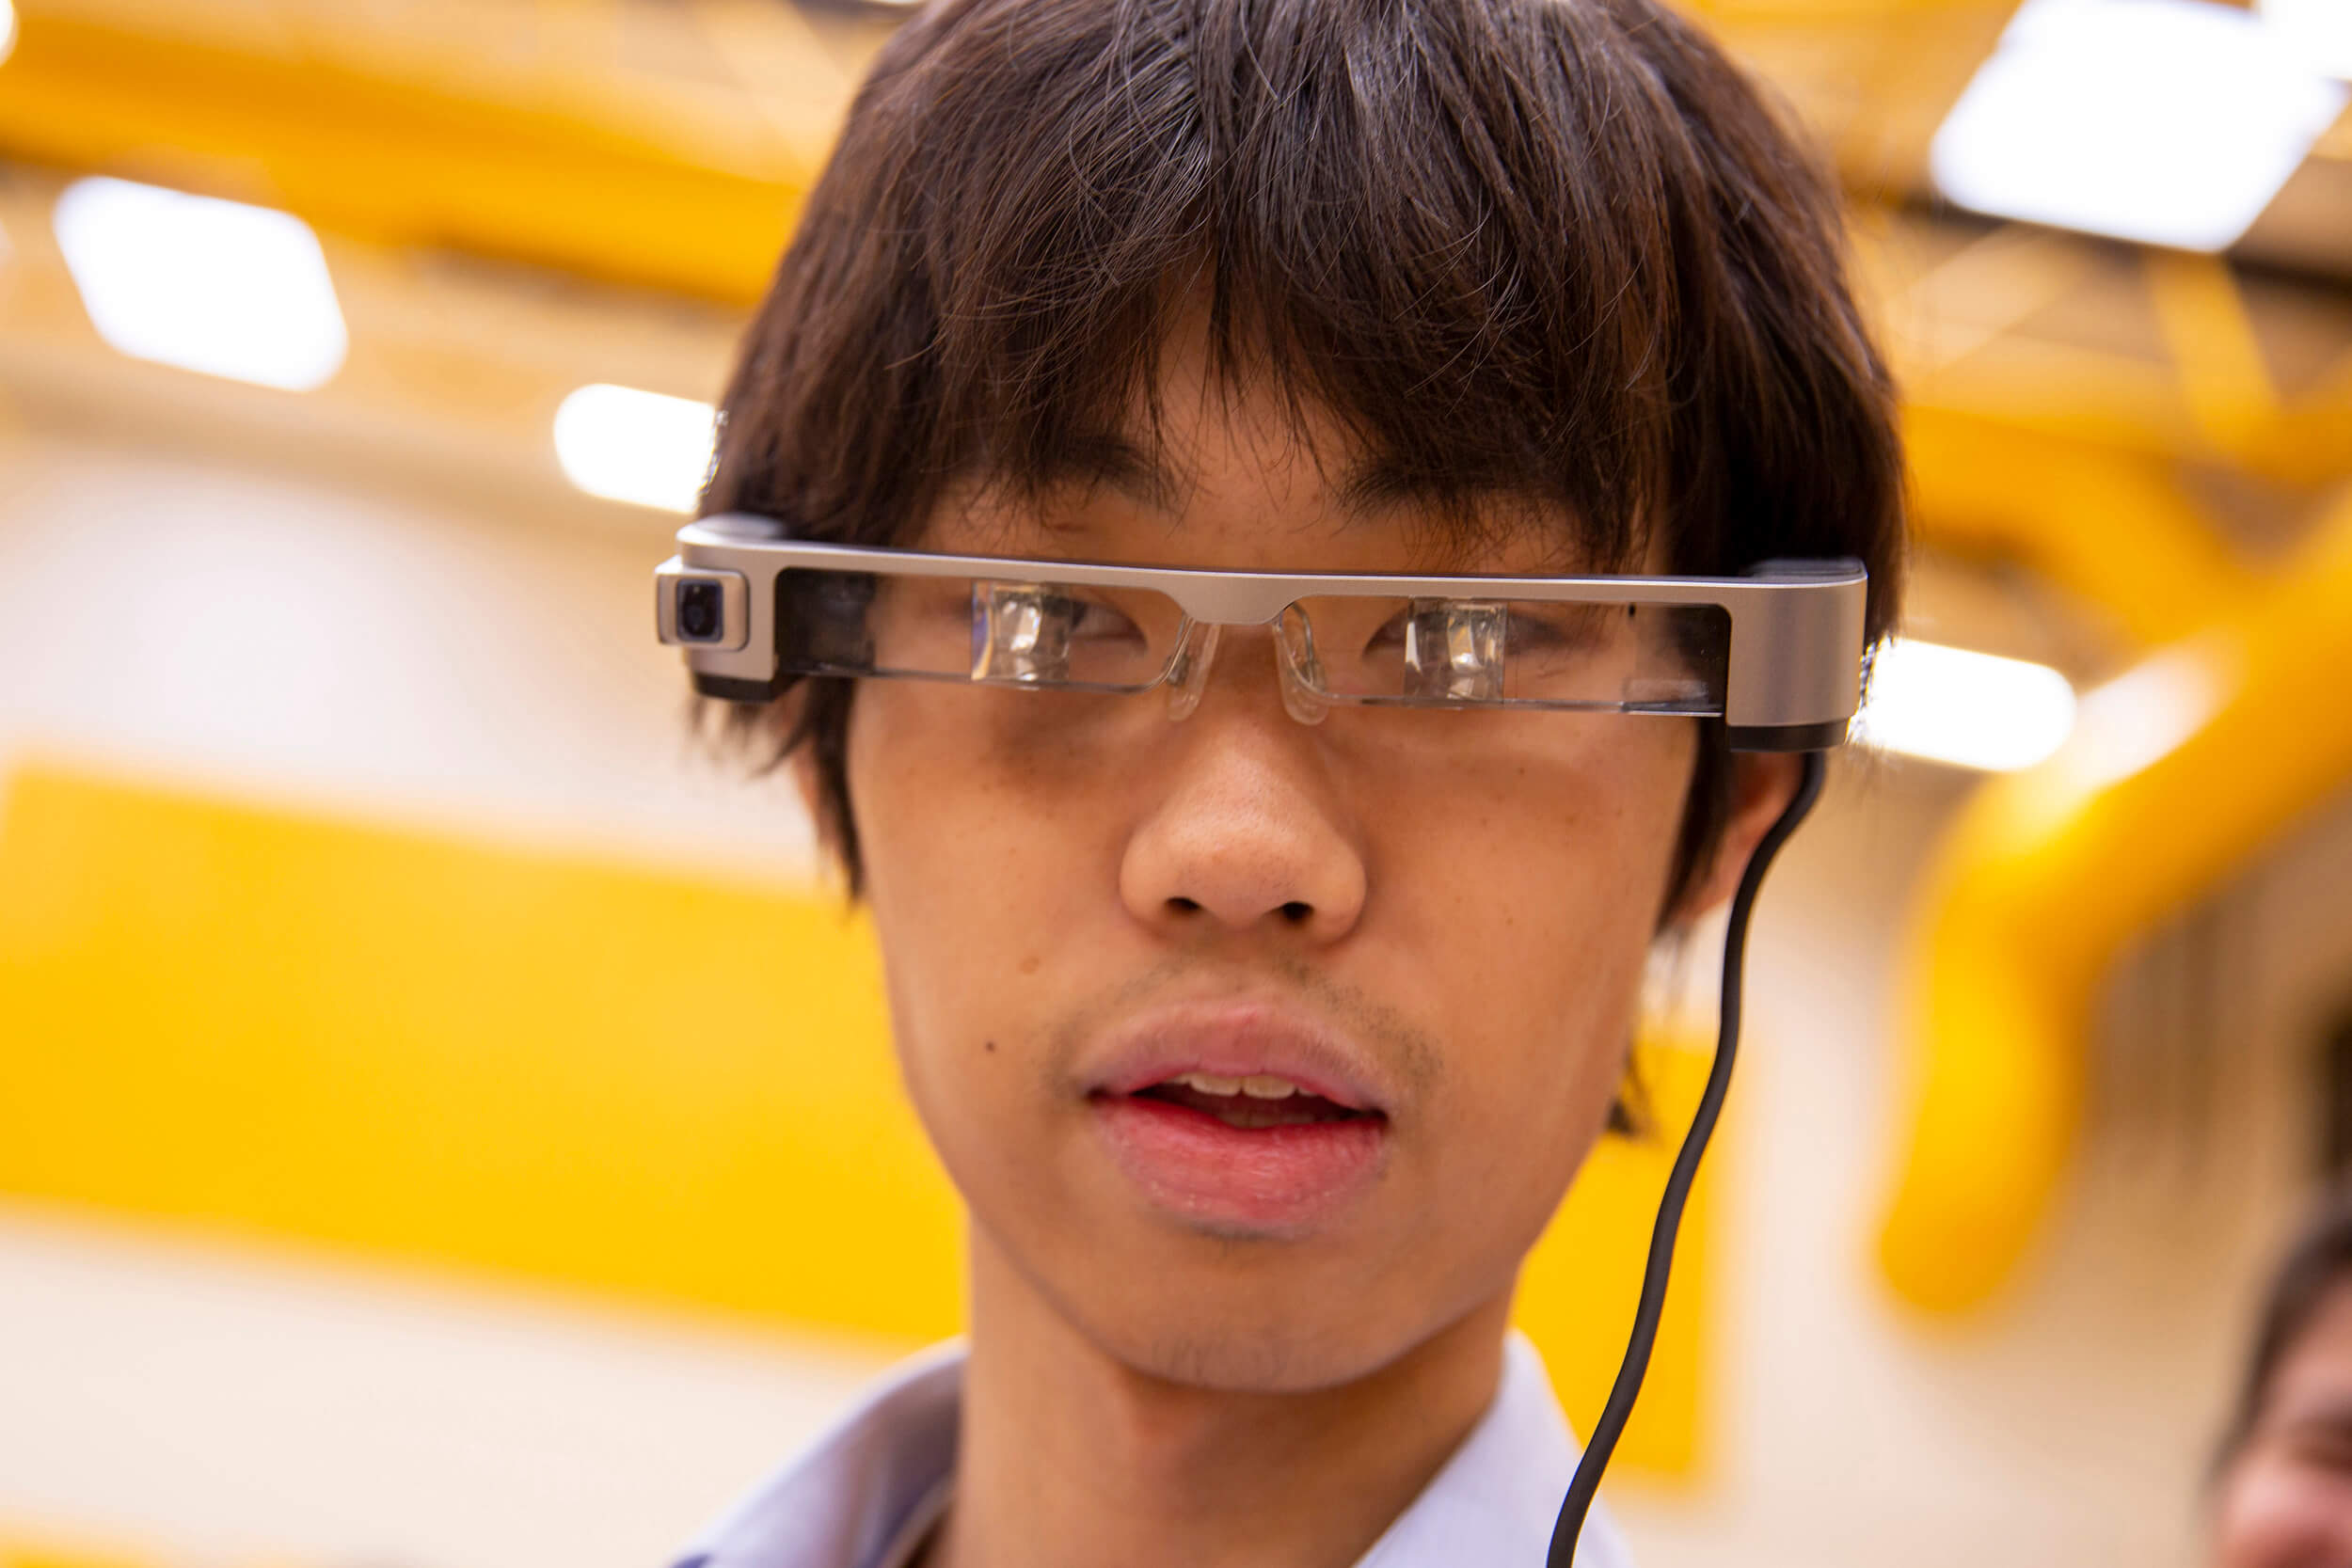 Close up of an undergraduate student at a student capstone (final project) event wearing a futuristic, thin type of electronic eyewear with small square lenses attached to a cable, which were part of his research presentation "Dynamic Signal Model for Immersive Therapeutic Biofeedback"